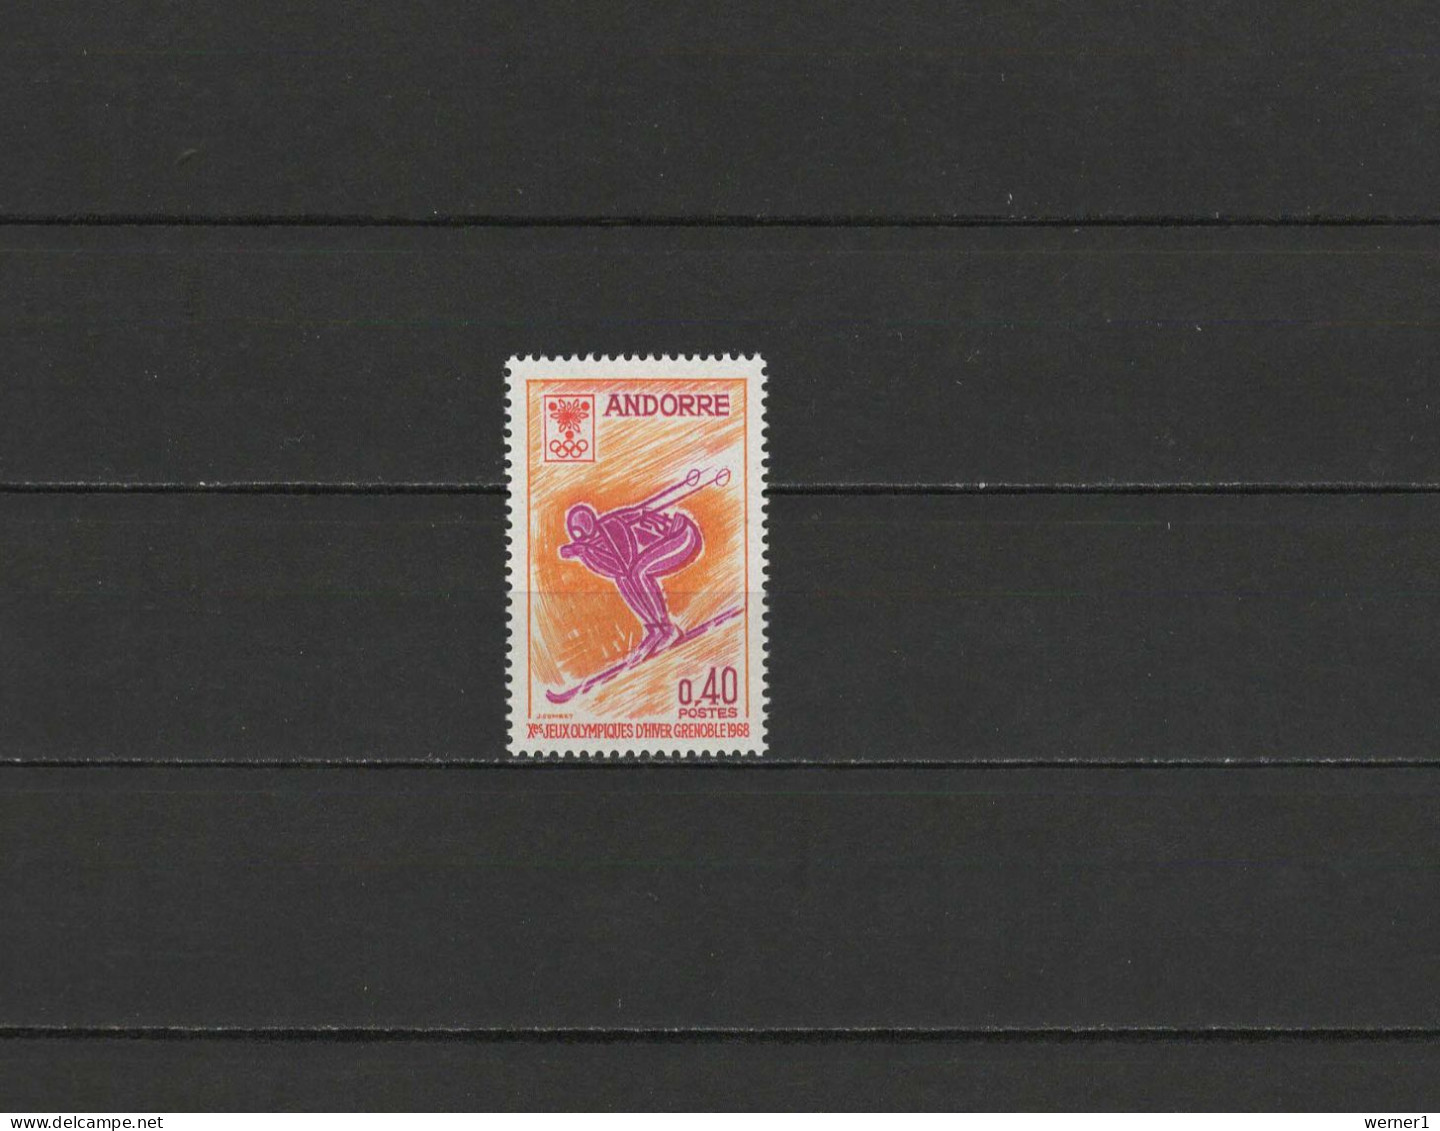 Andorra French 1968 Olympic Games Grenoble Stamp MNH - Hiver 1968: Grenoble